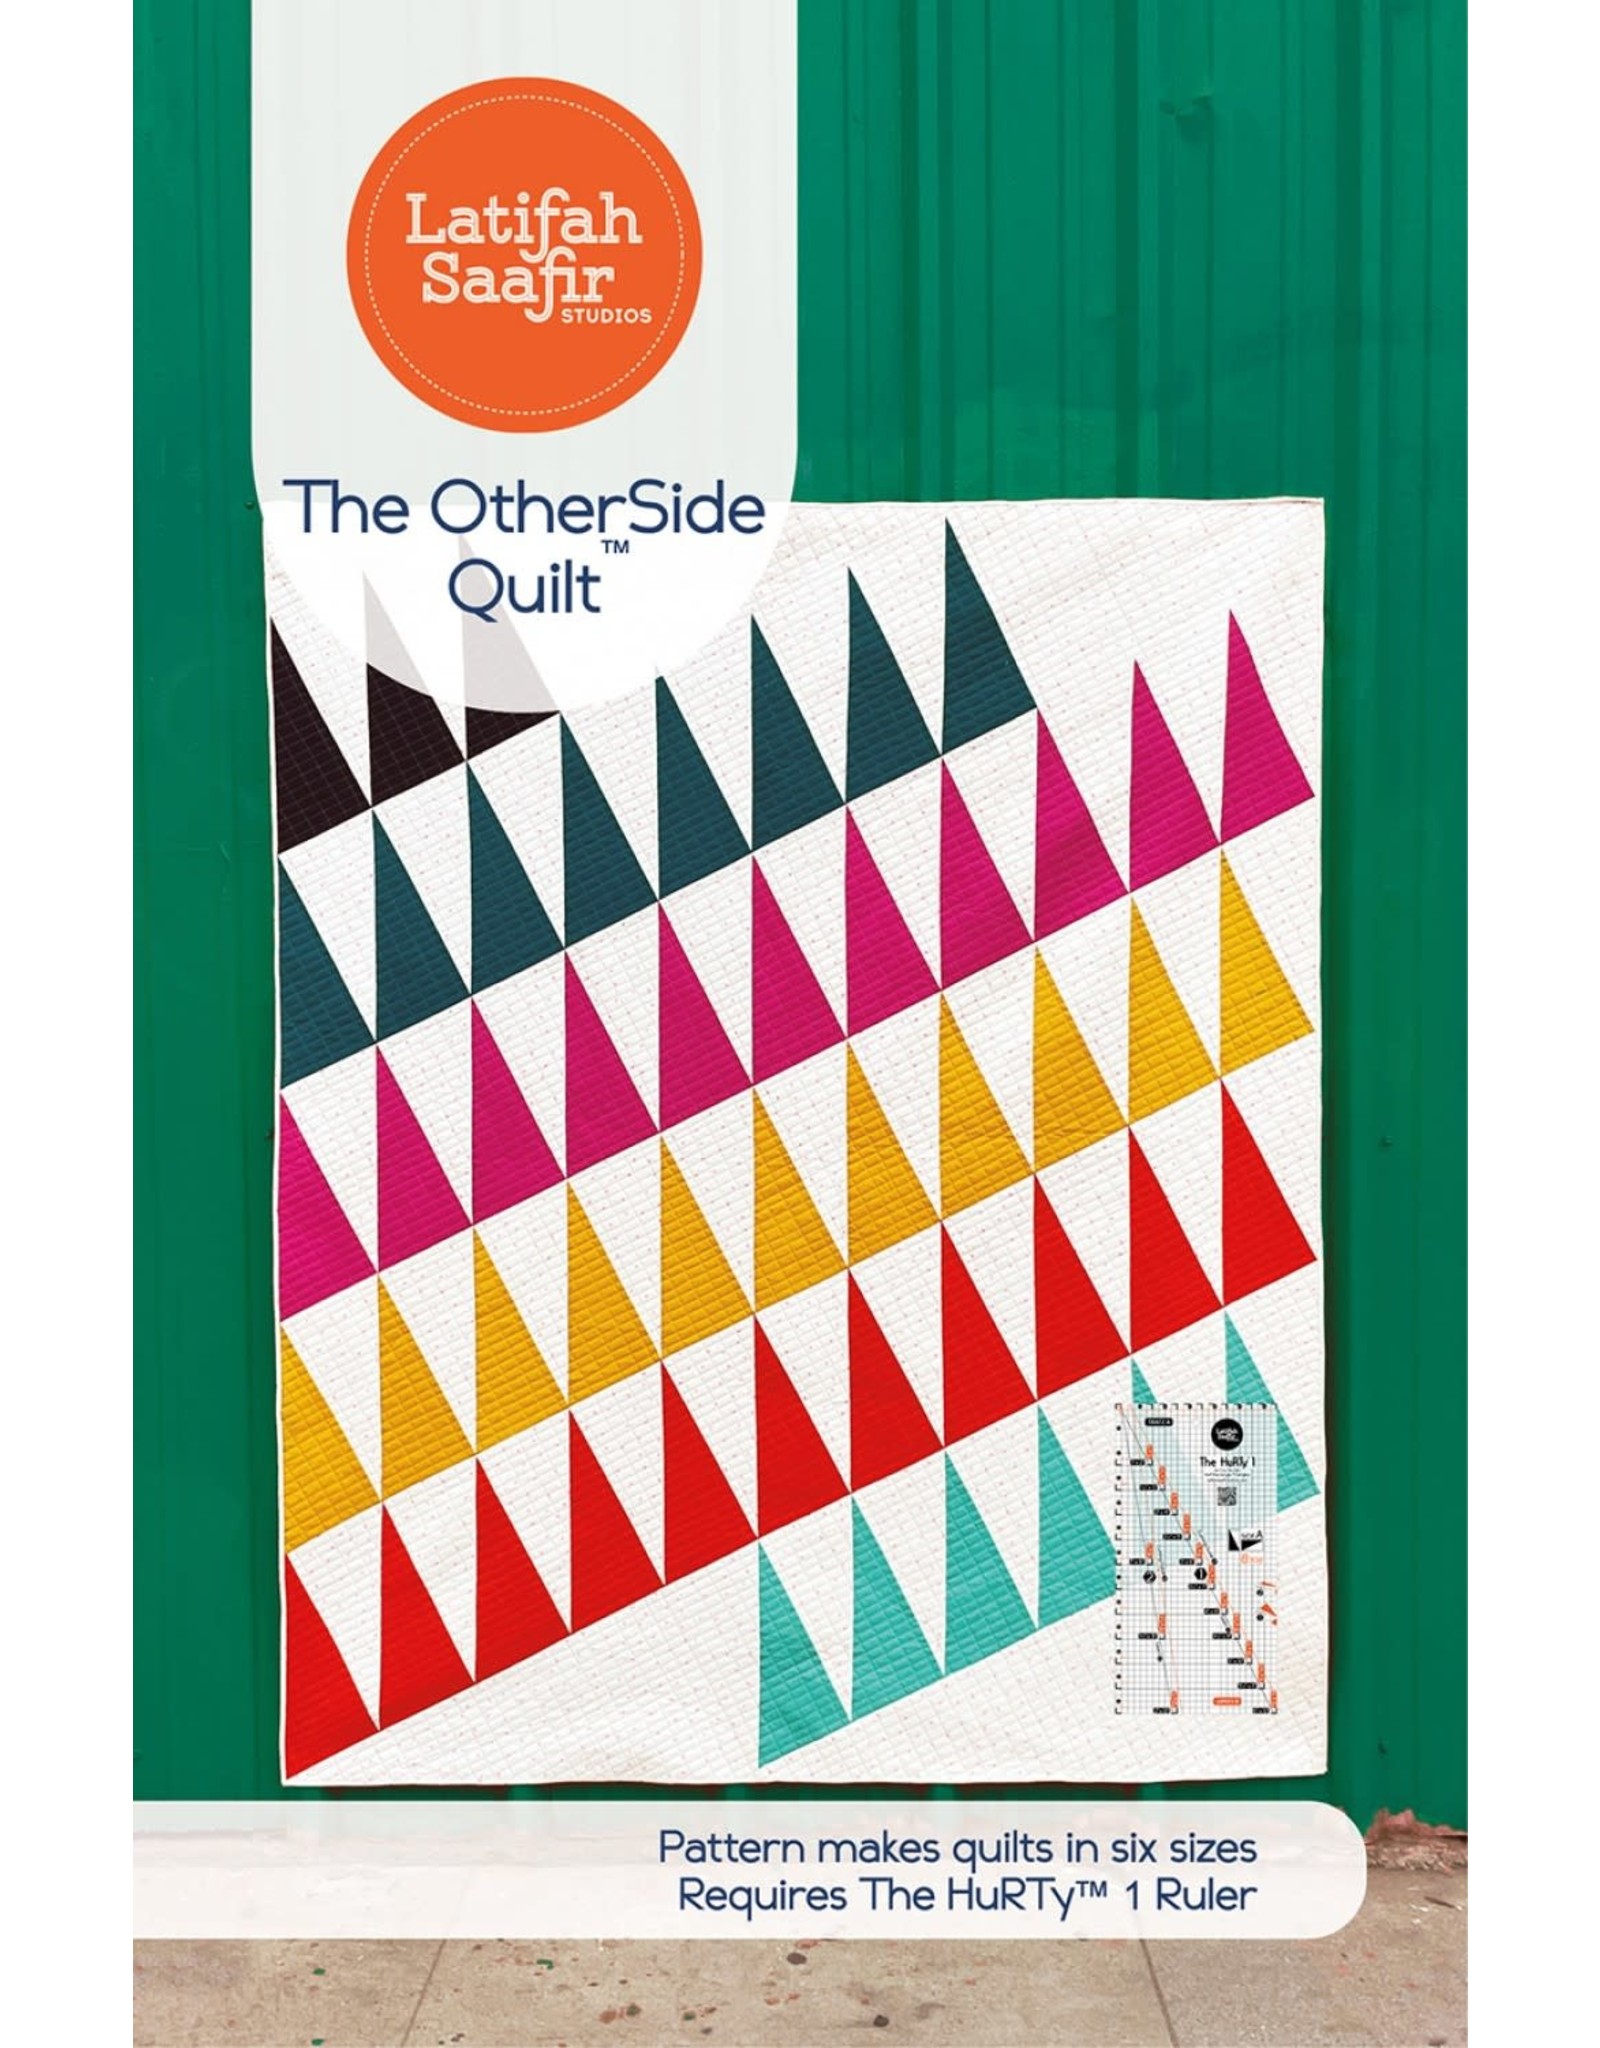 Latifah Saafir Studios Latifah Saafir Studios - The Otherside Quilt - patroon